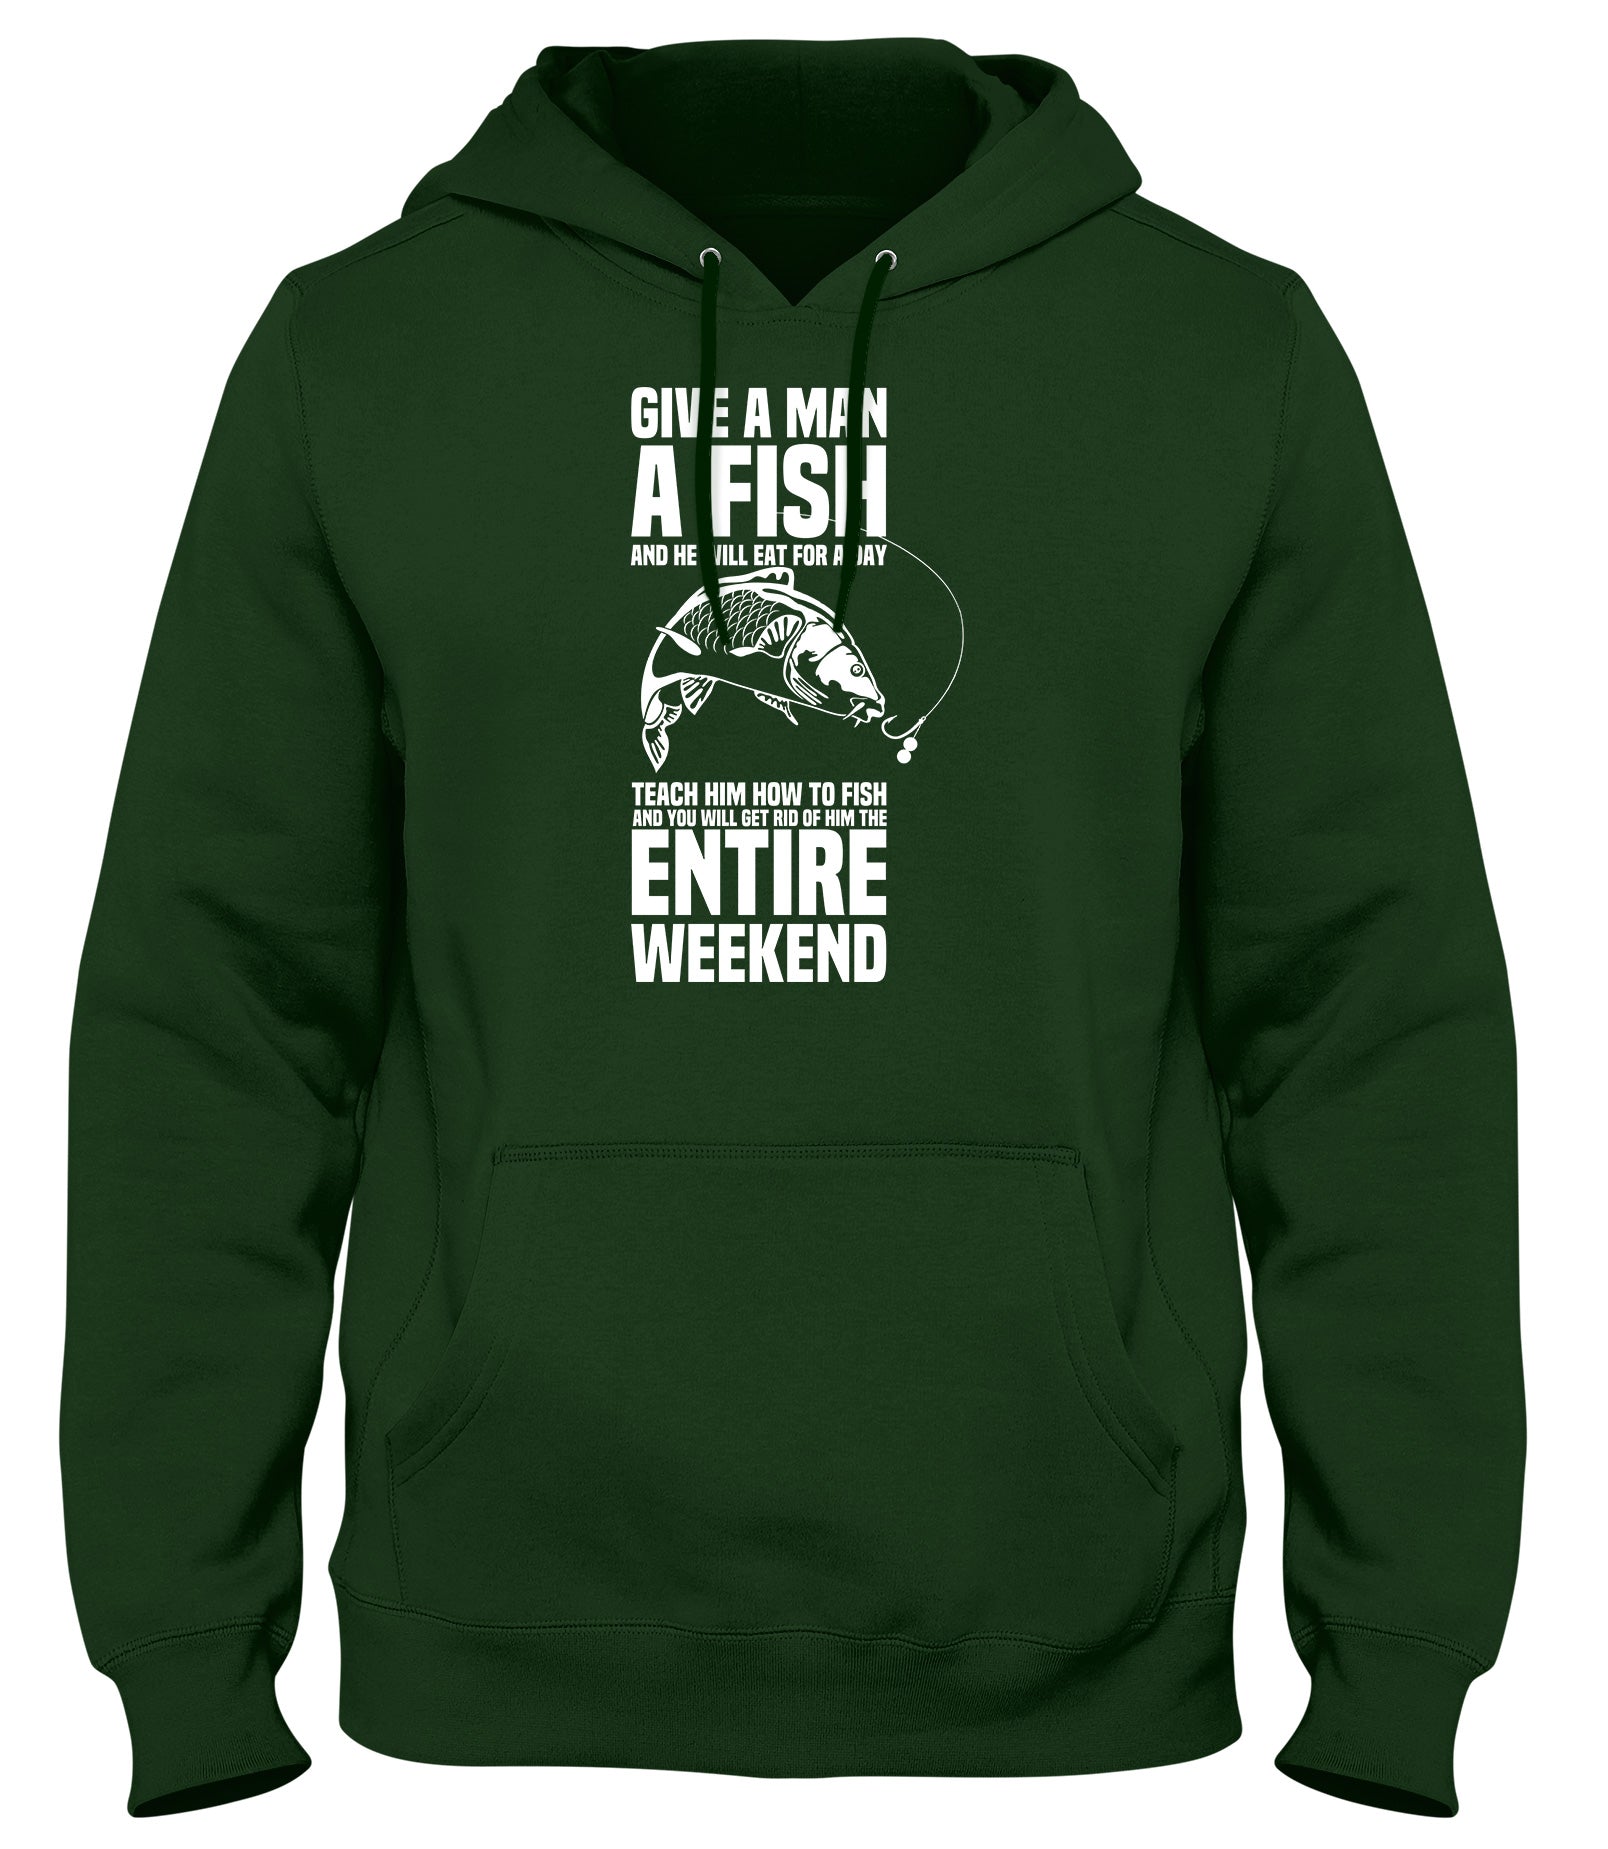 GIVE A MAN A FISH AND HE WILL EAT FOR A DAY MENS WOMENS LADIES UNISEX FUNNY SLOGAN HOODIE